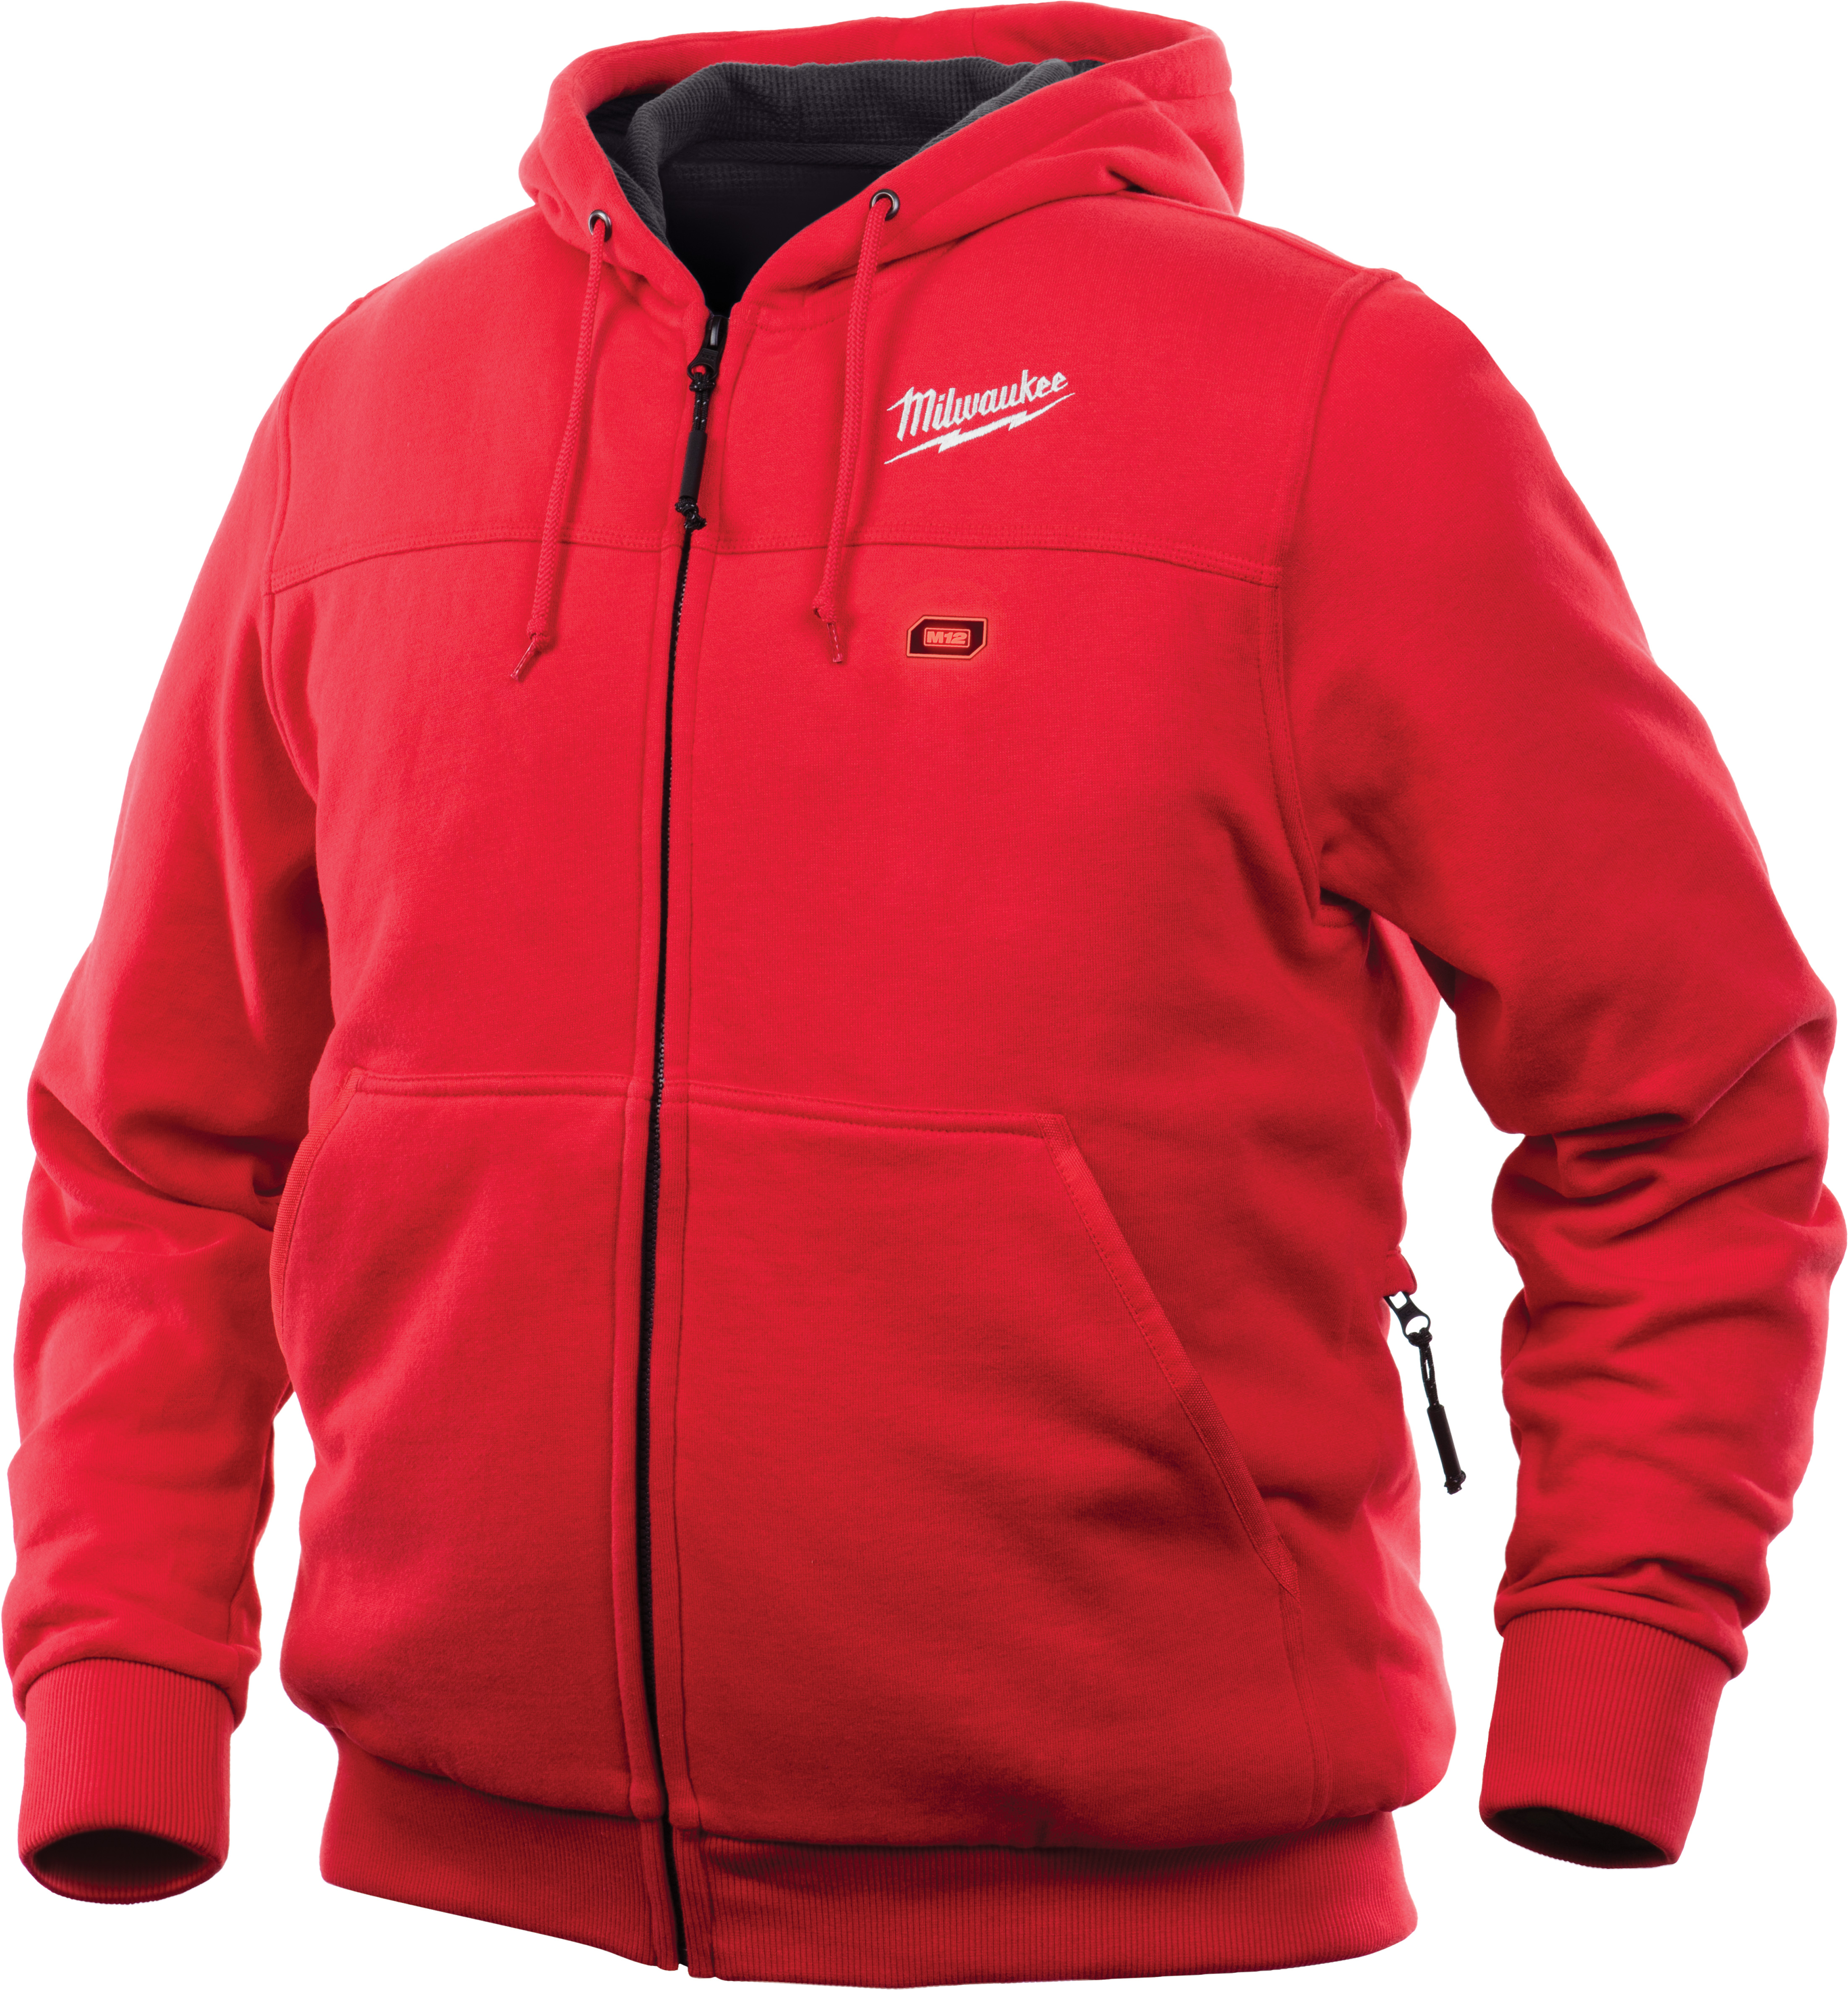 302R-20XL 045242524167 Powered by M12™ REDLITHIUM™ battery technology, Milwaukee® M12™ heated hoodies use carbon fiber heating elements to create and distribute heat to the chest and back. A one-touch LED controller allows users to select from three heat settings, delivering ideal heat for any environment. The new quick-heat function allows users to feel heat 3X faster than previous hoodies and market competitors. Combining a durable cotton/polyester exterior with a waffle weave thermal lining, the hoodie provides a versatile three-season solution to keep heat in and allow users to shed bulky layers.